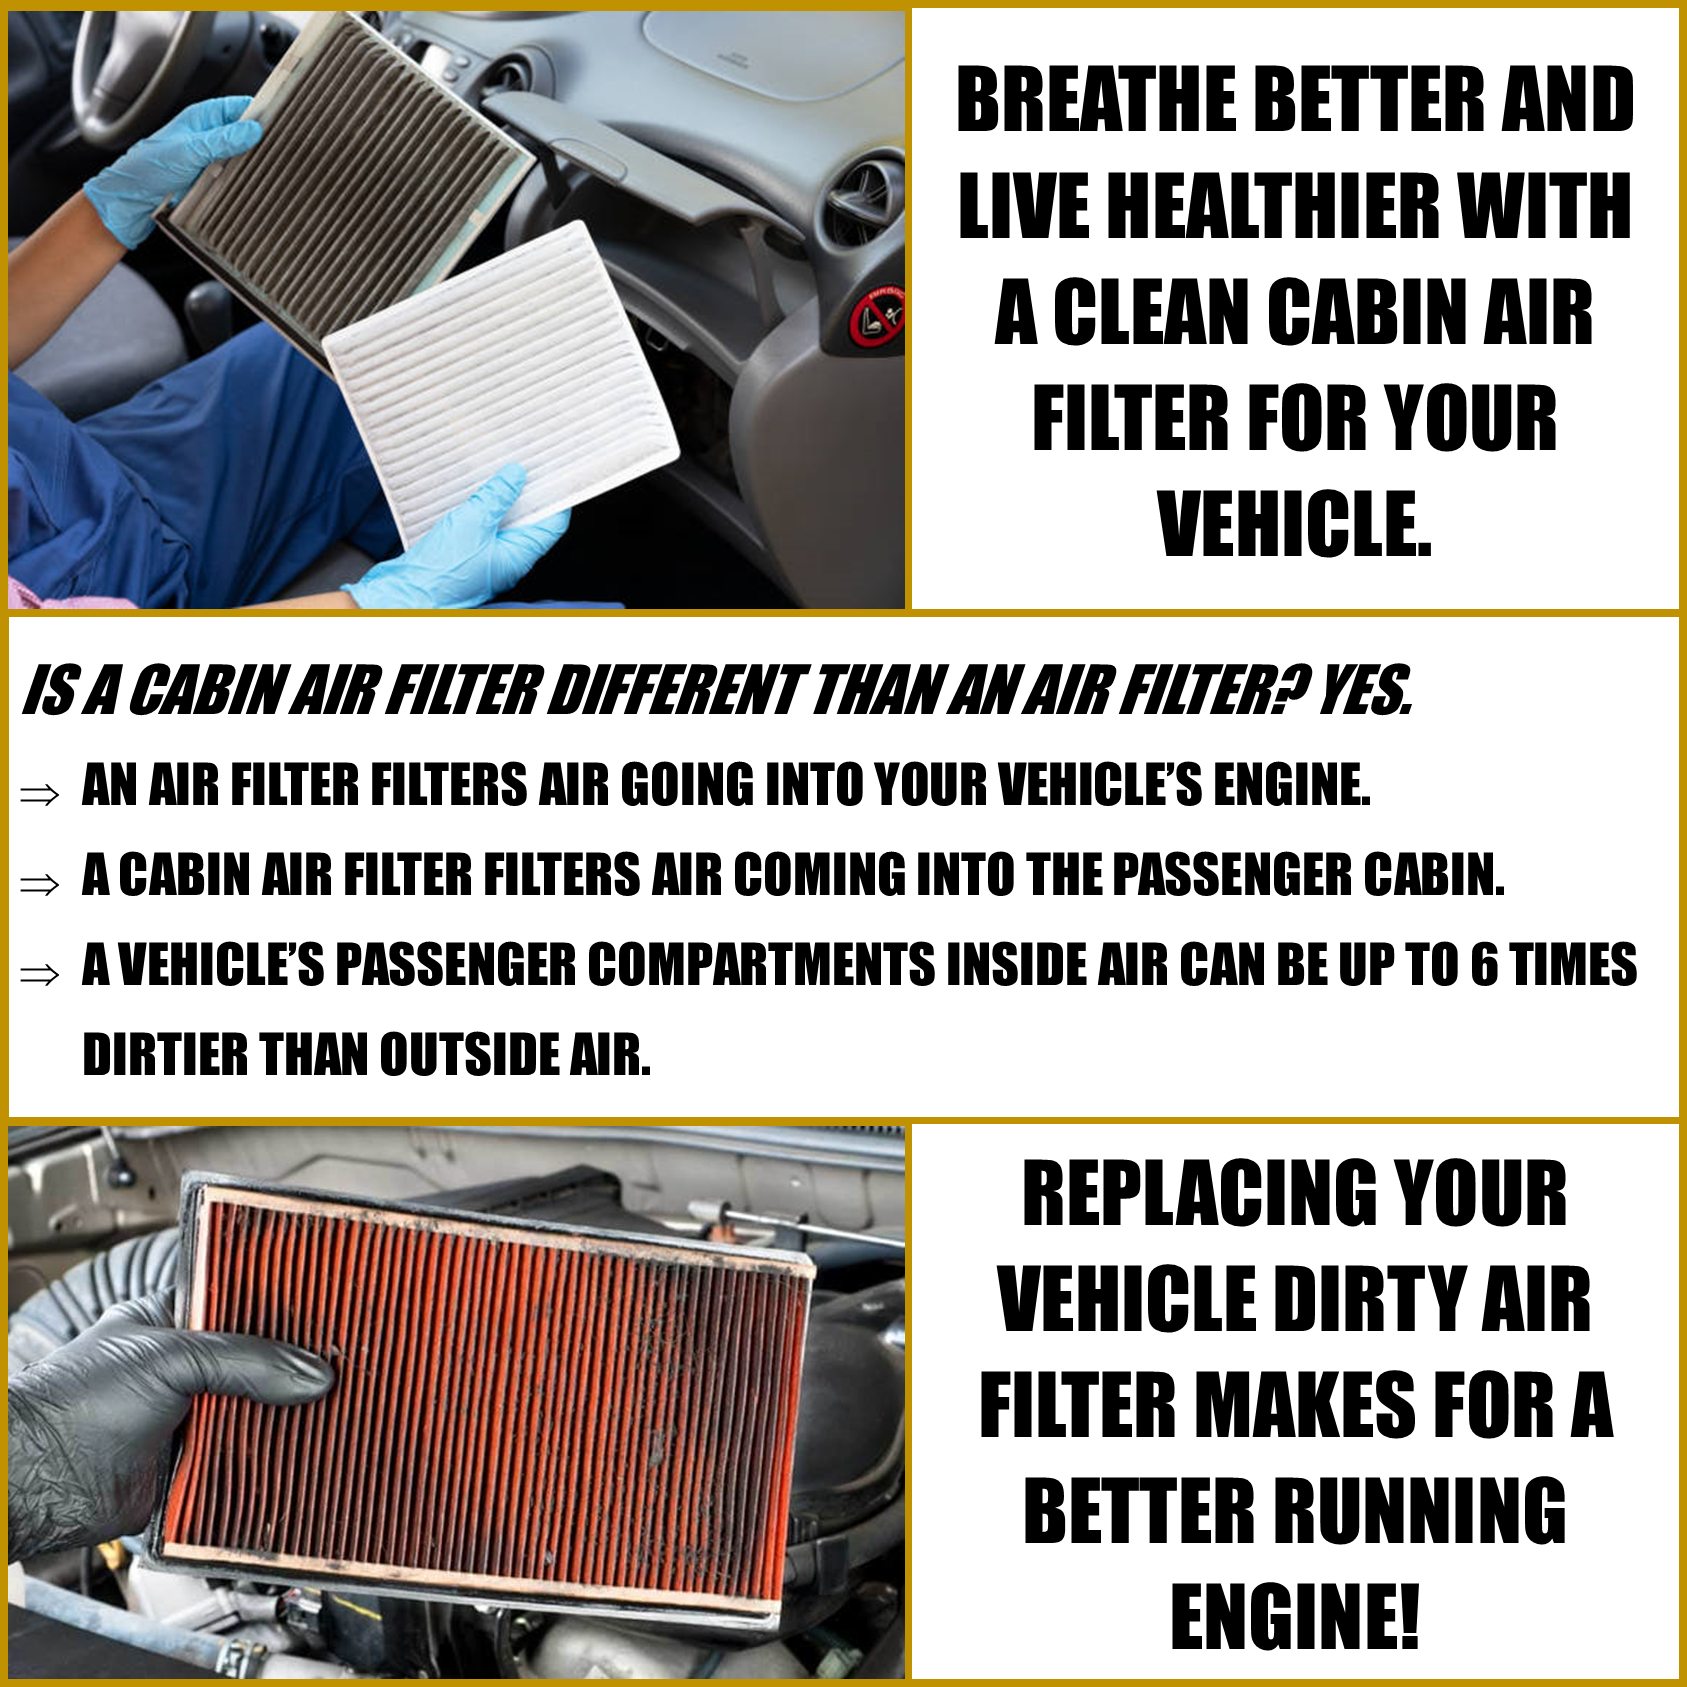 Breathe better and live healthier with a clean Cabin Air Filter.